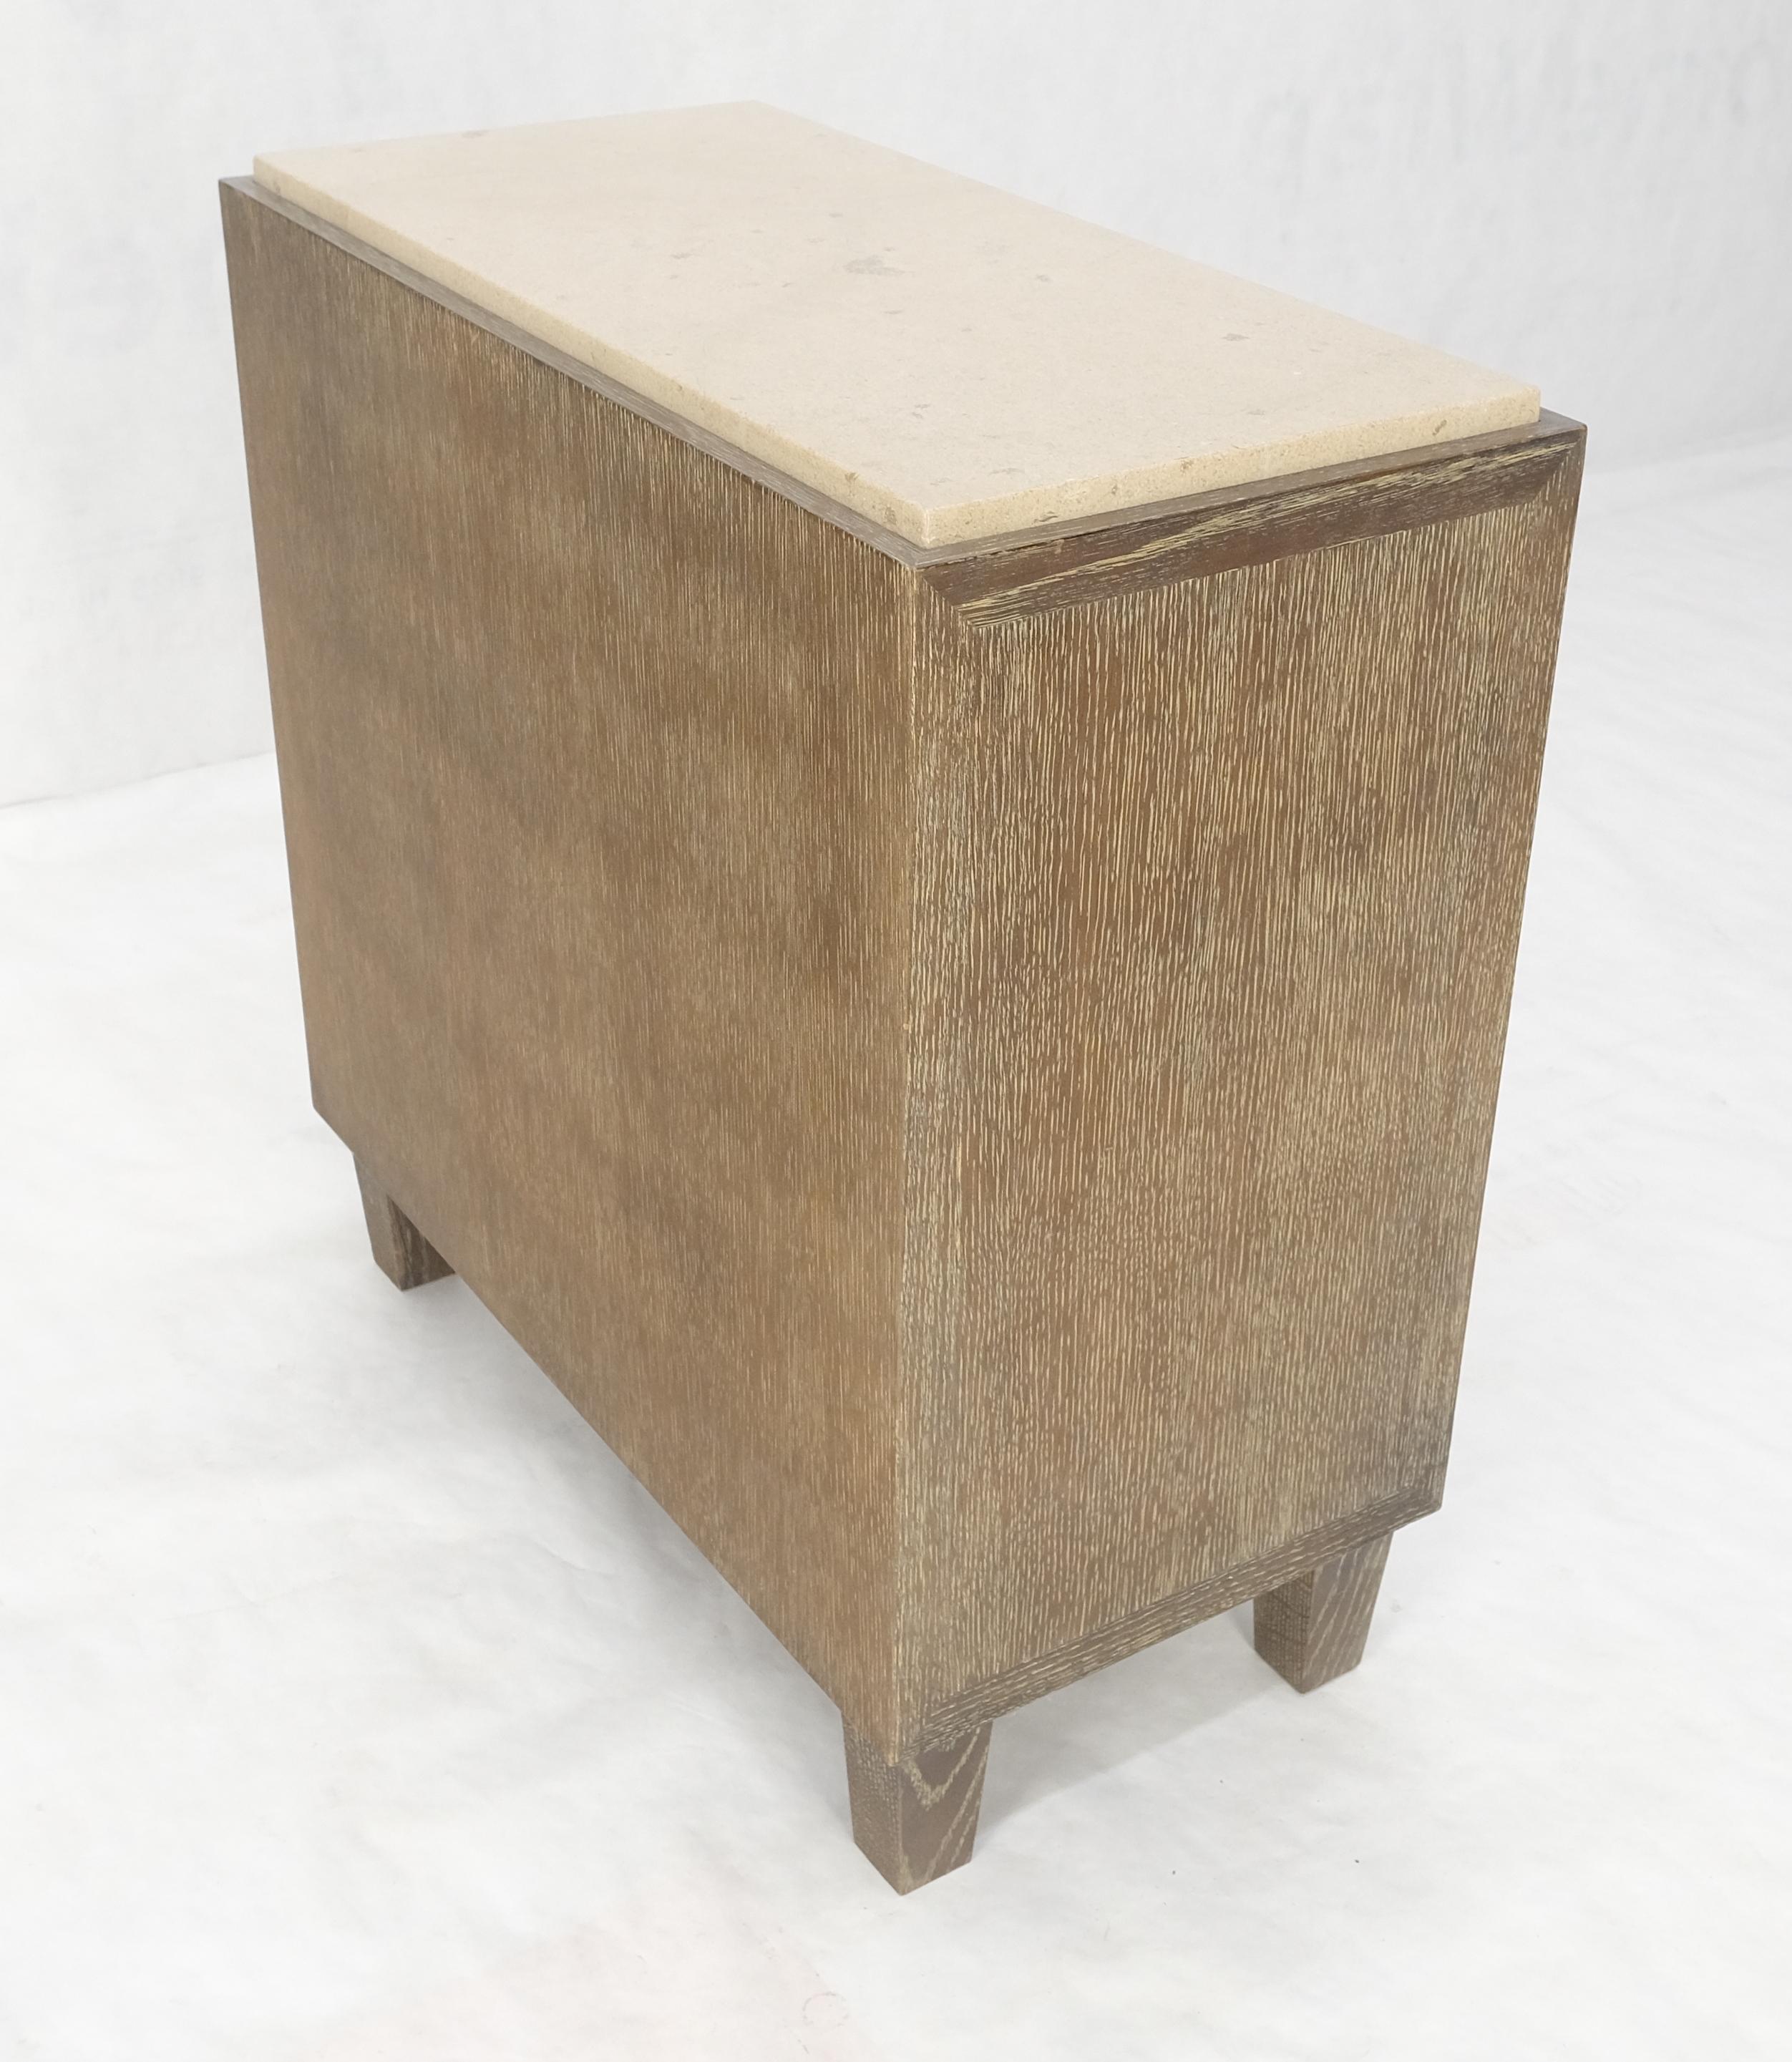 Travertine Top Cerused Drop Front Doors Compartments Night Stand End Table MINT For Sale 2